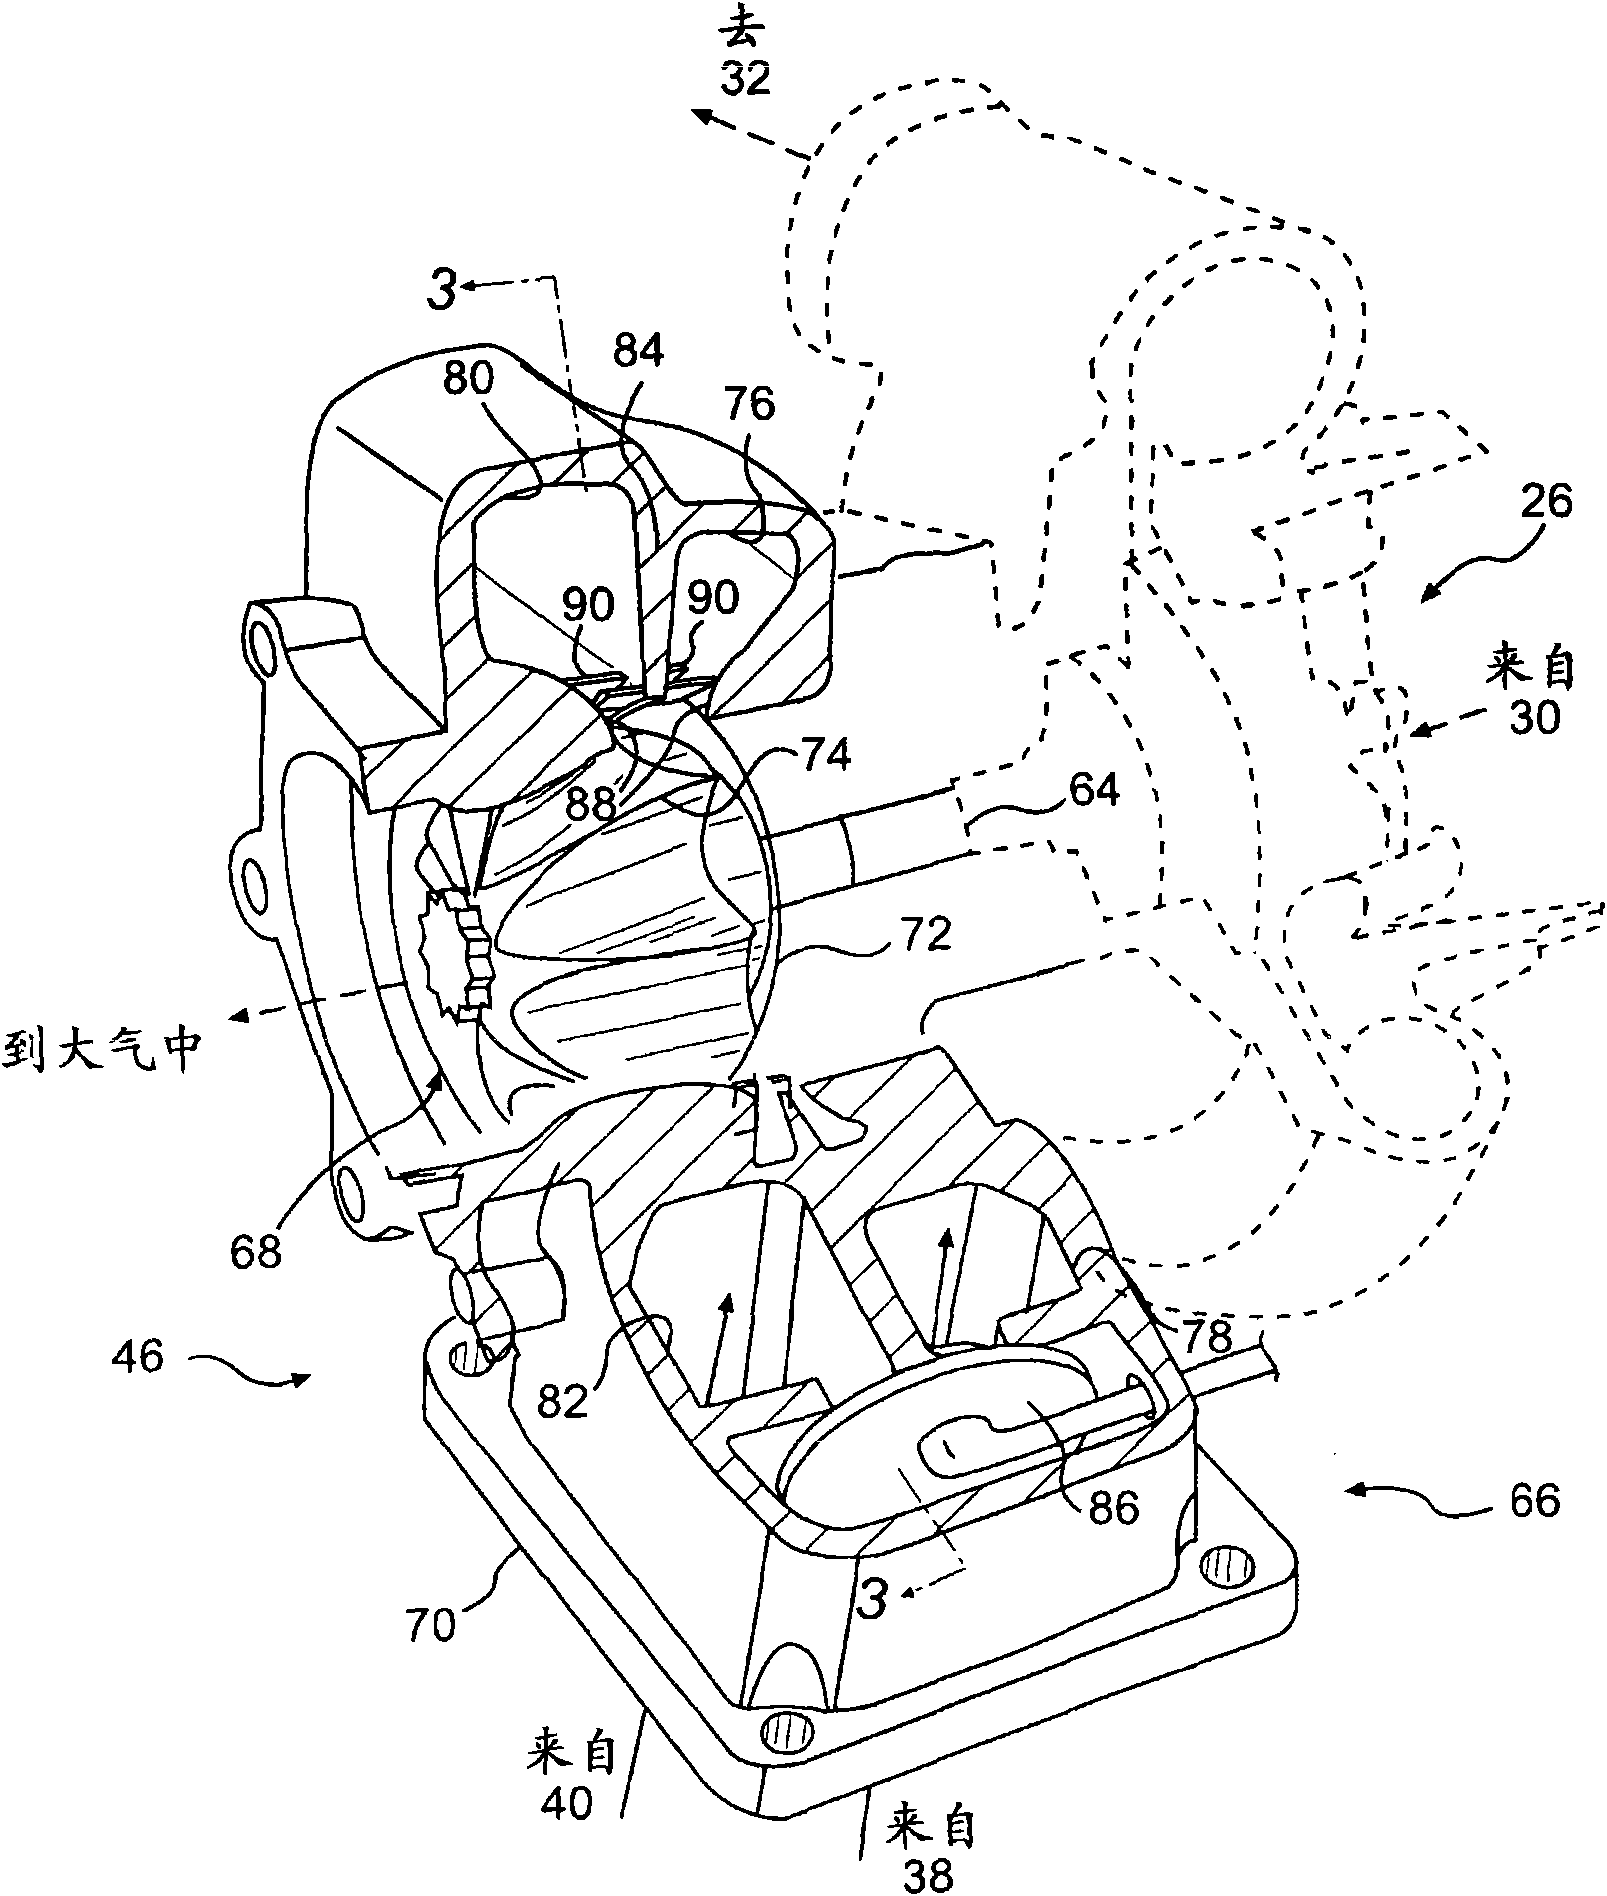 Exhaust gas turbocharger with 2 inflow channels connected by a valve